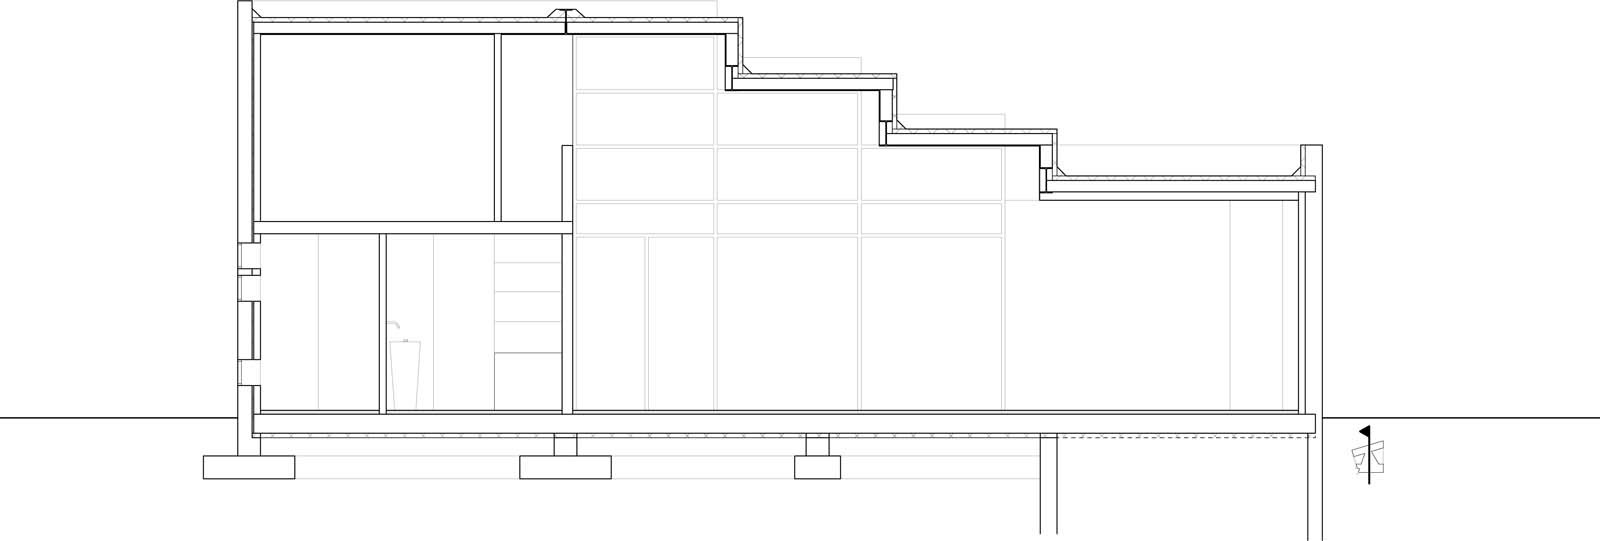 Section through central living space. (Drawing: Richard Gouverneur, Hans van Heeswijk Architects)